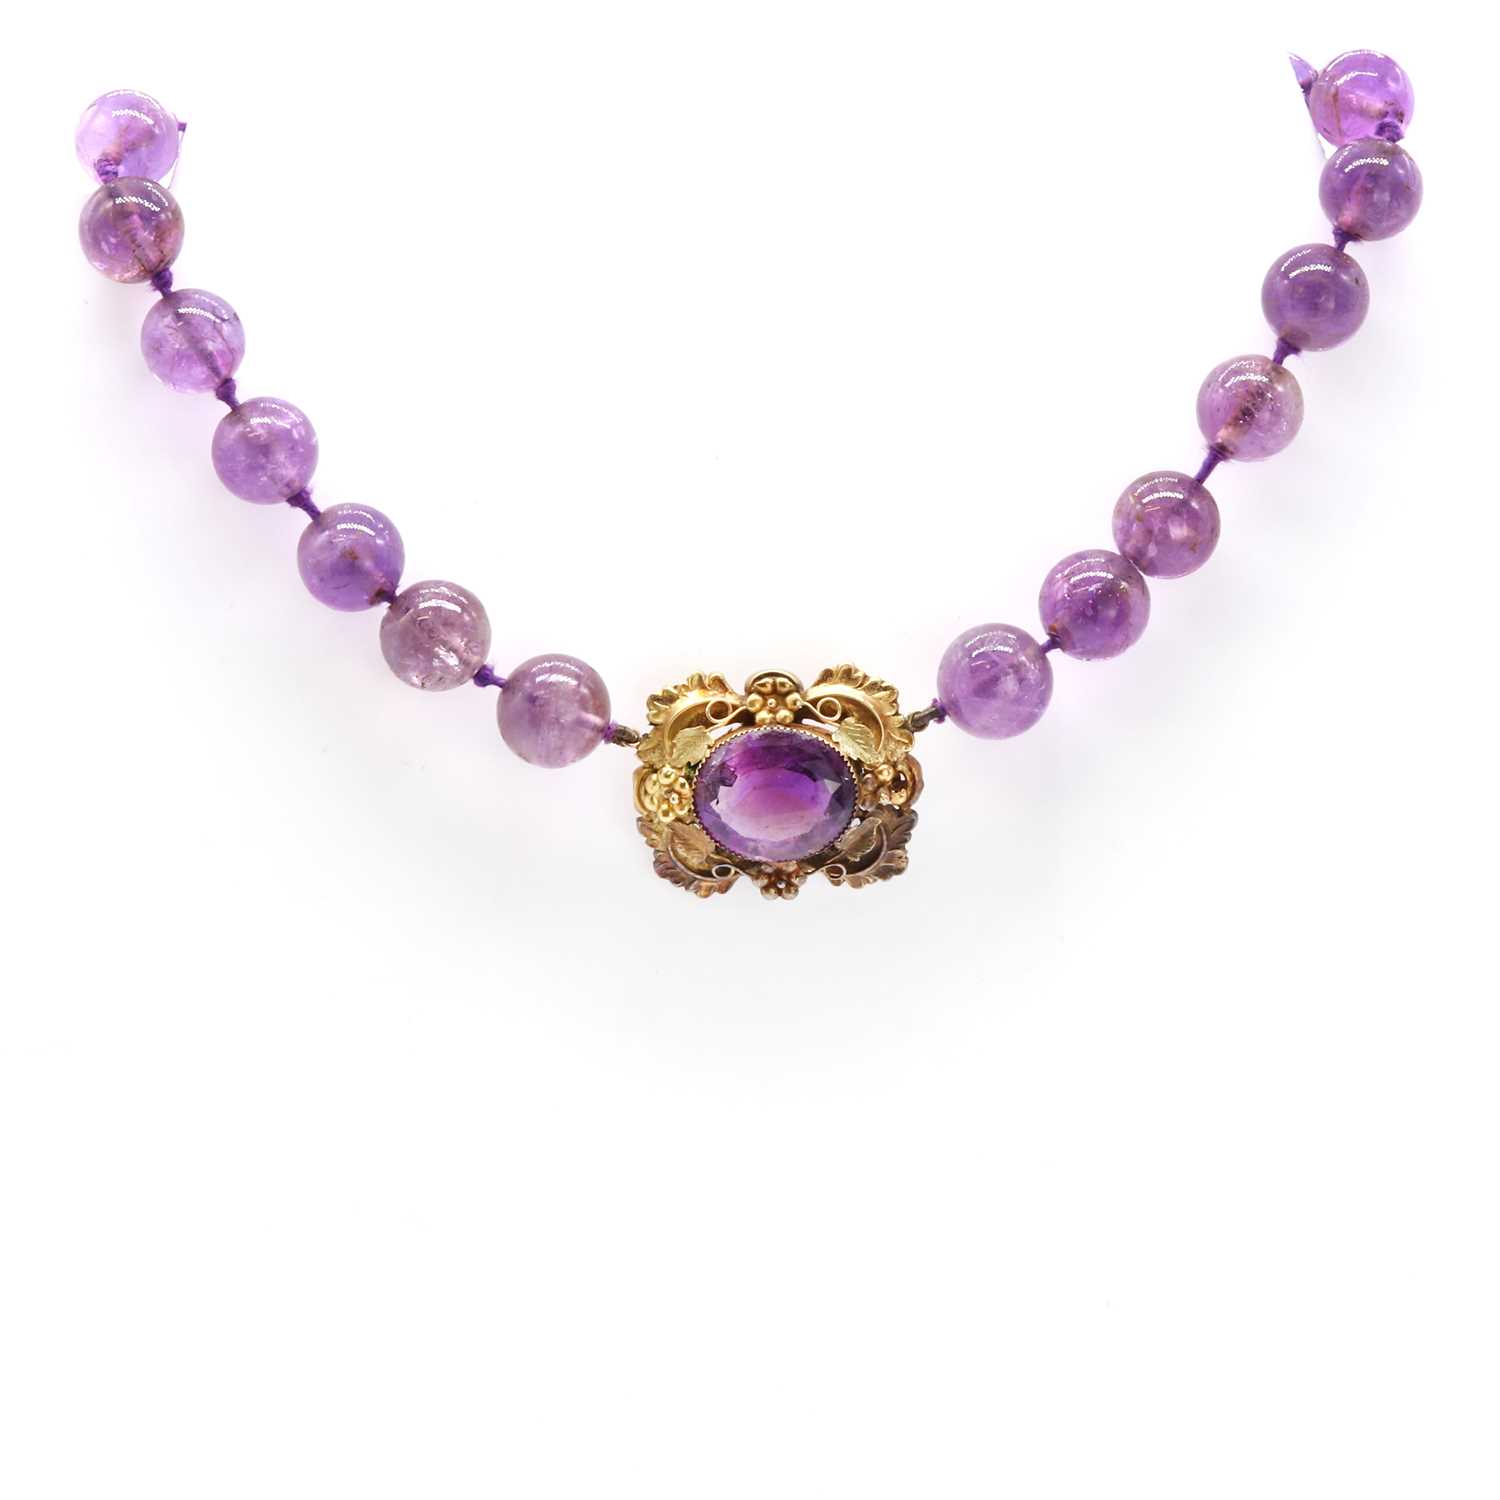 A graduated circular amethyst bead necklace with an amethyst brooch centrepiece,